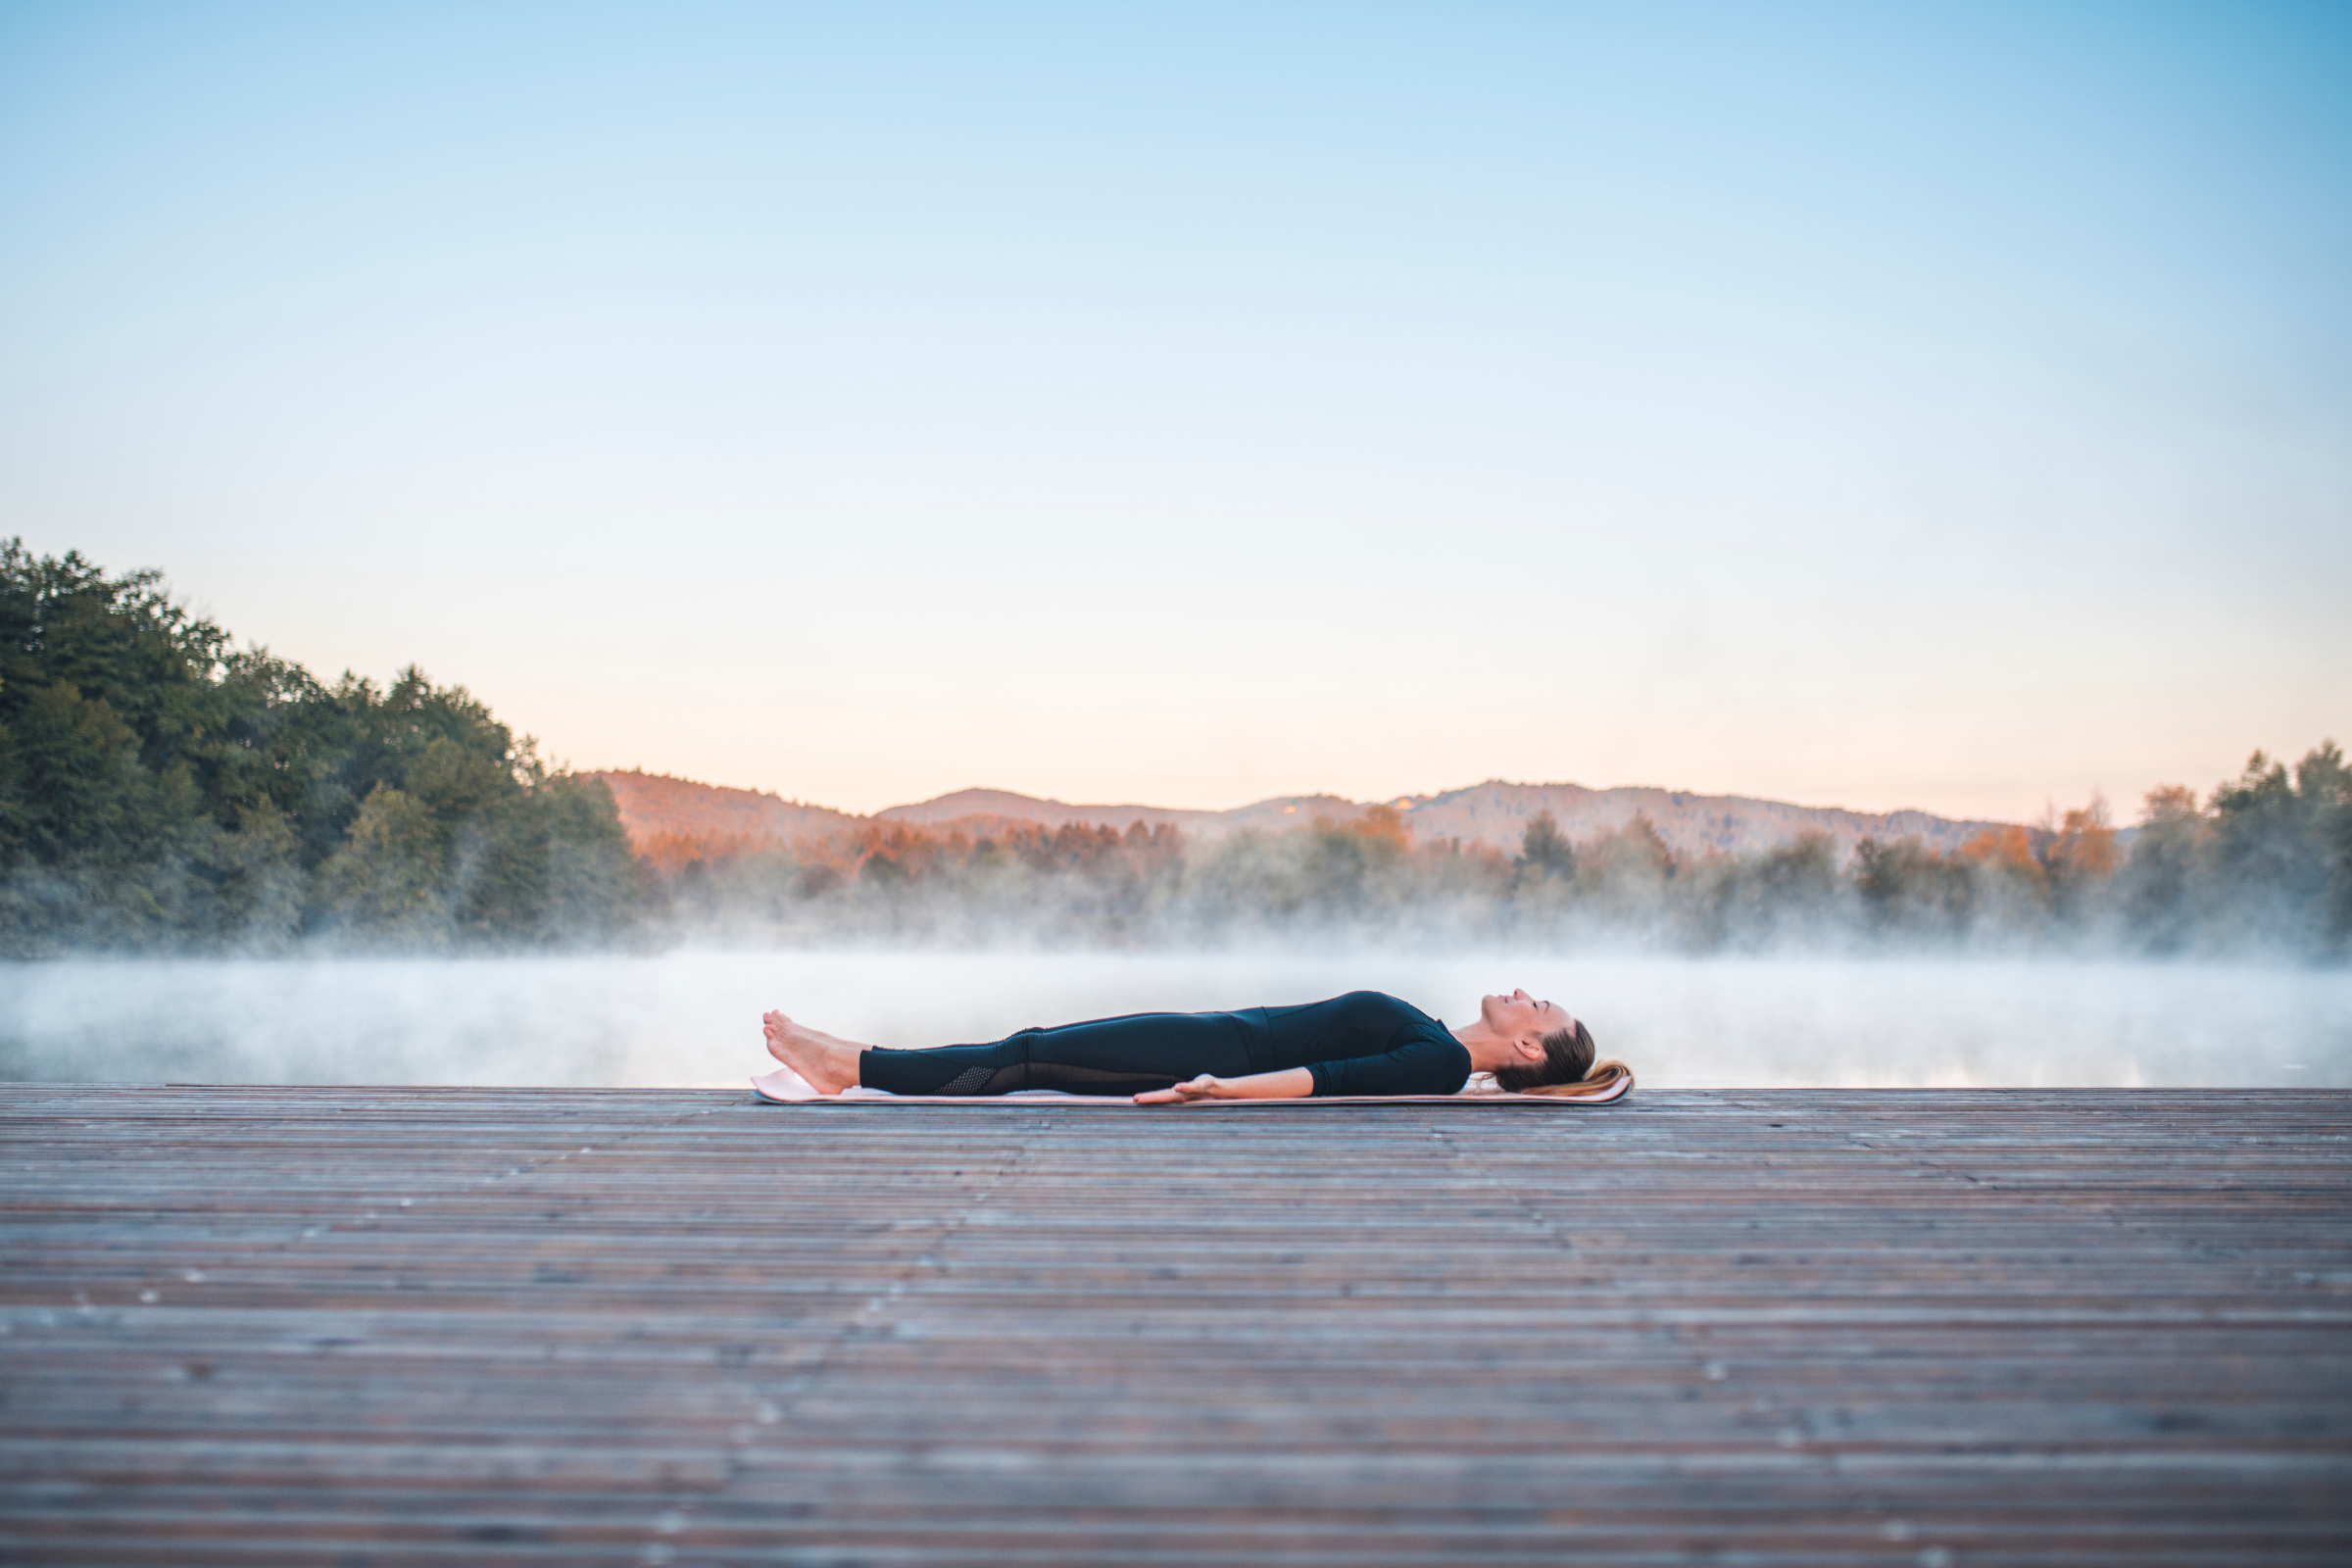 blonde woman with ponytail in all black on a wooden dock by water doing corpse svasana yoga pose